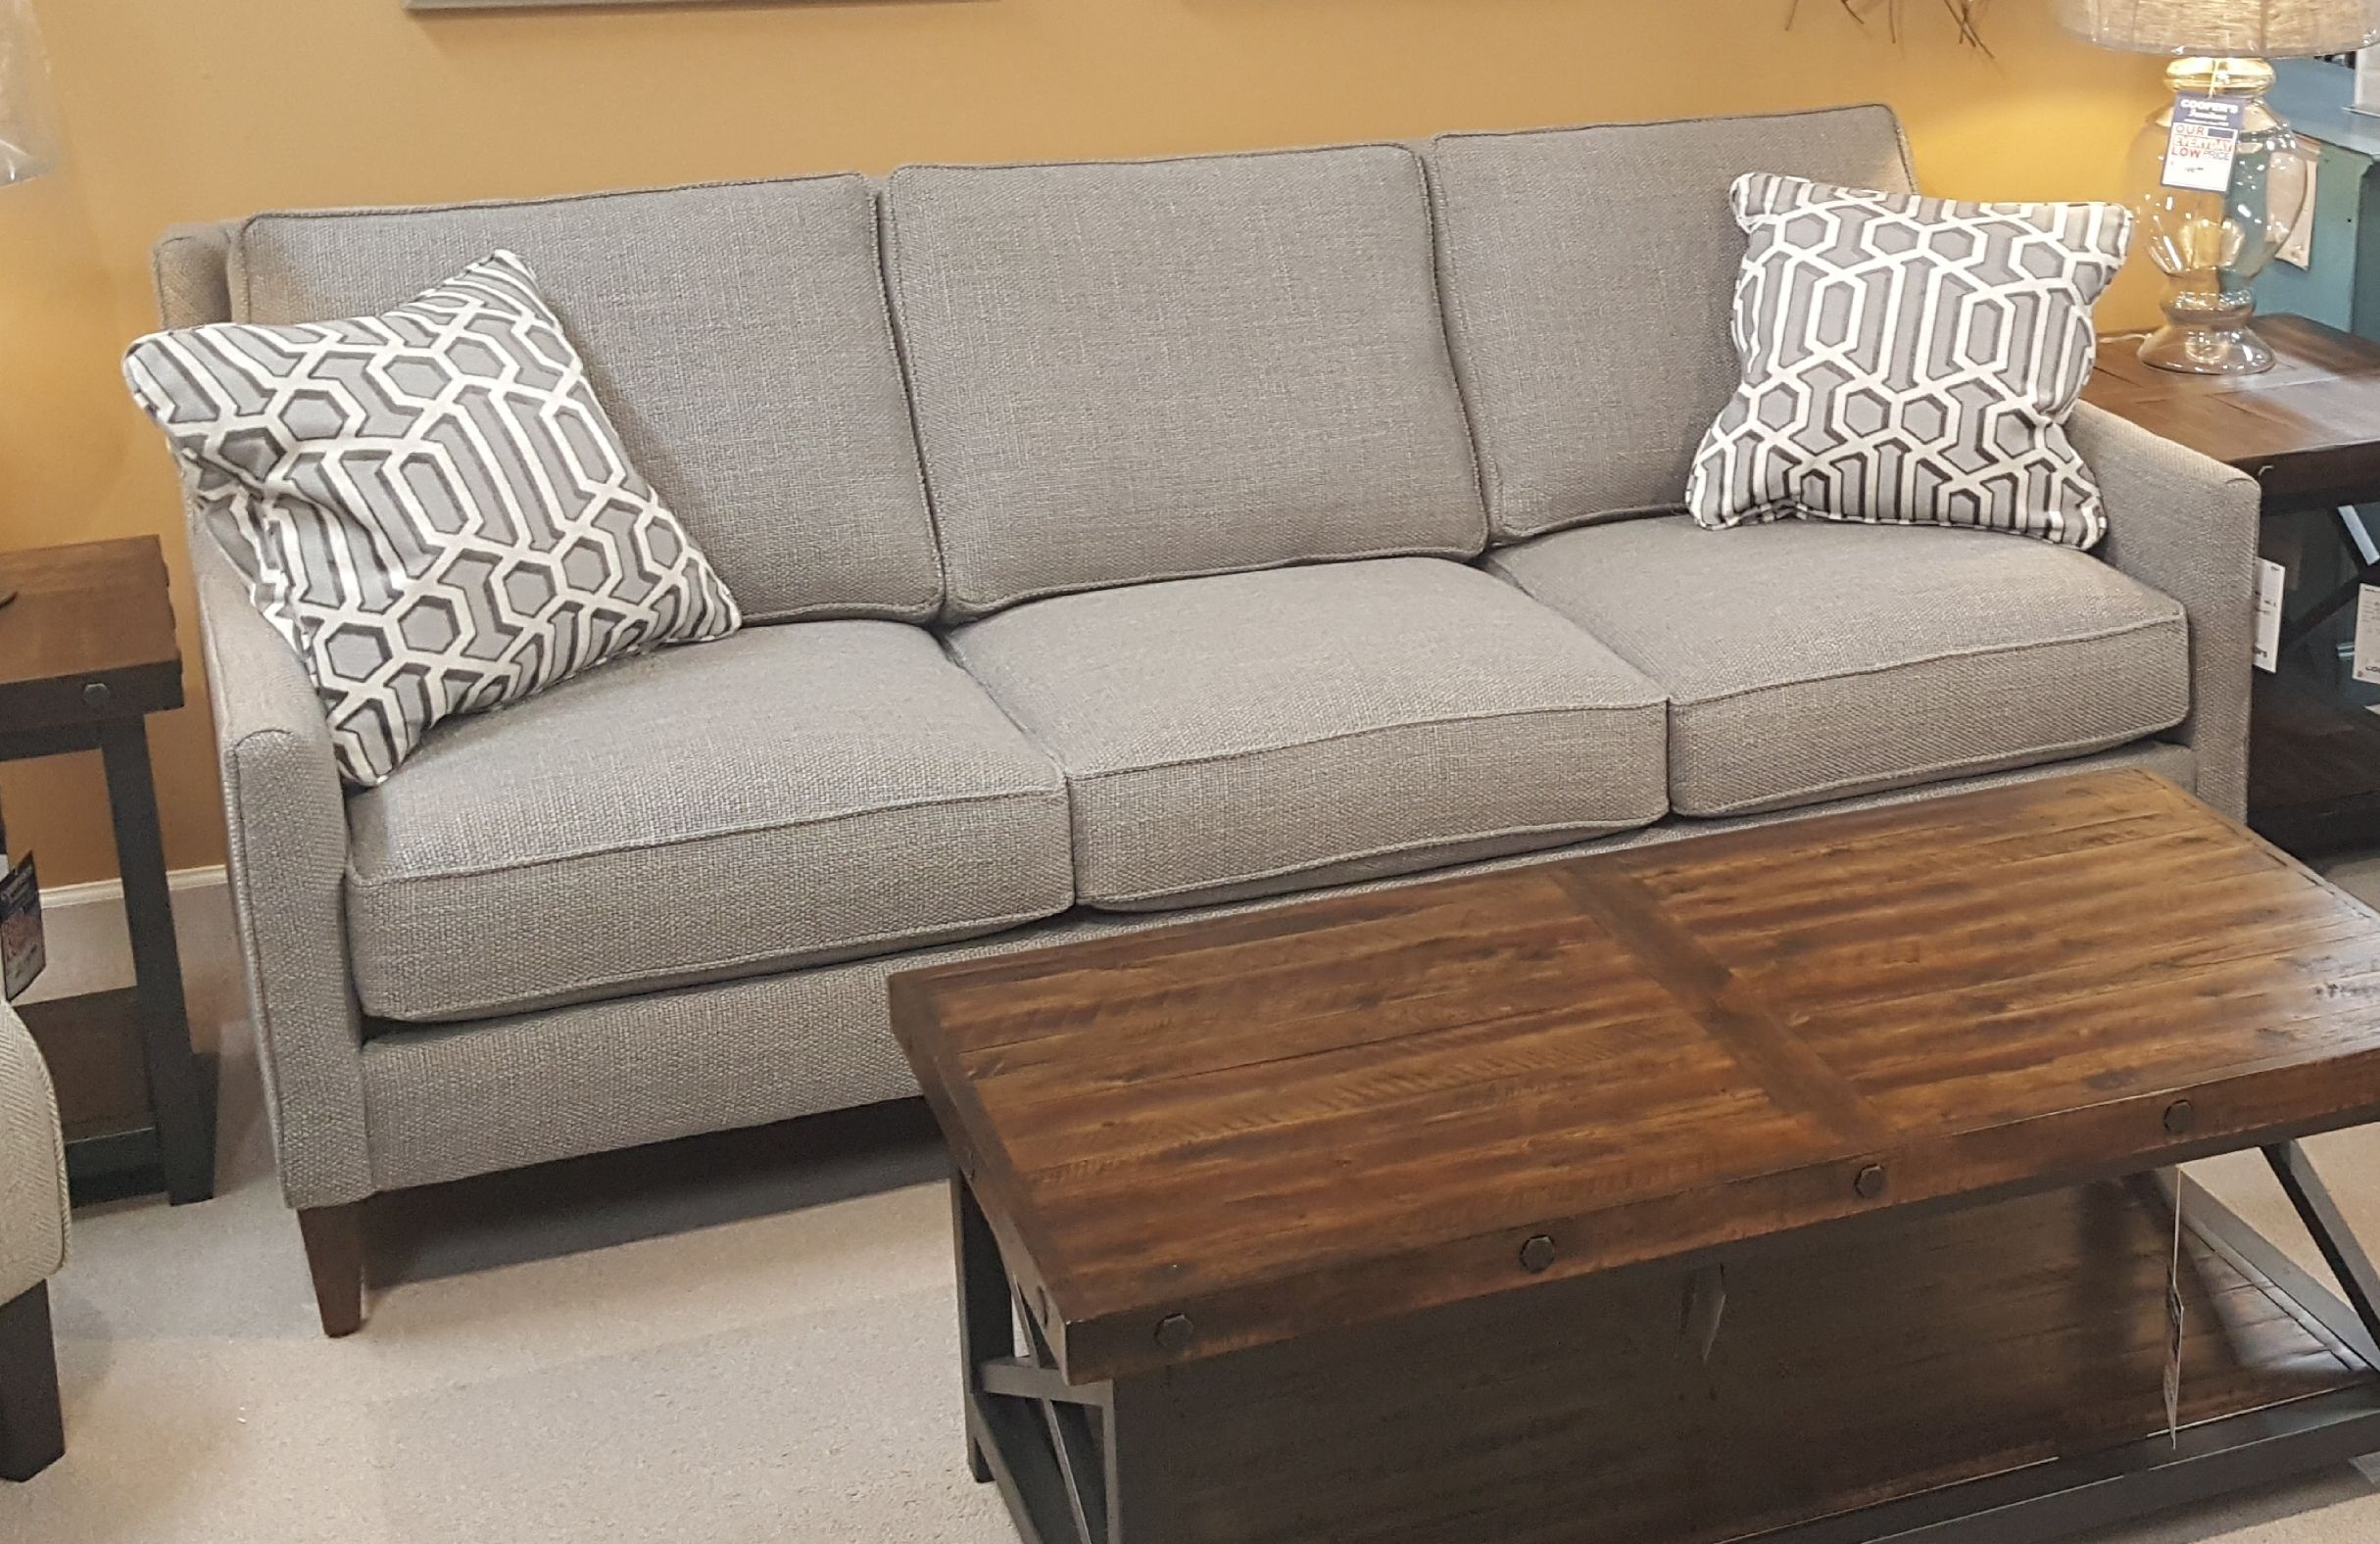 Living Room Furniture Cary Nc | Sofas, Recliners, Sectionals Throughout Durham Region Sectional Sofas (Photo 3 of 10)